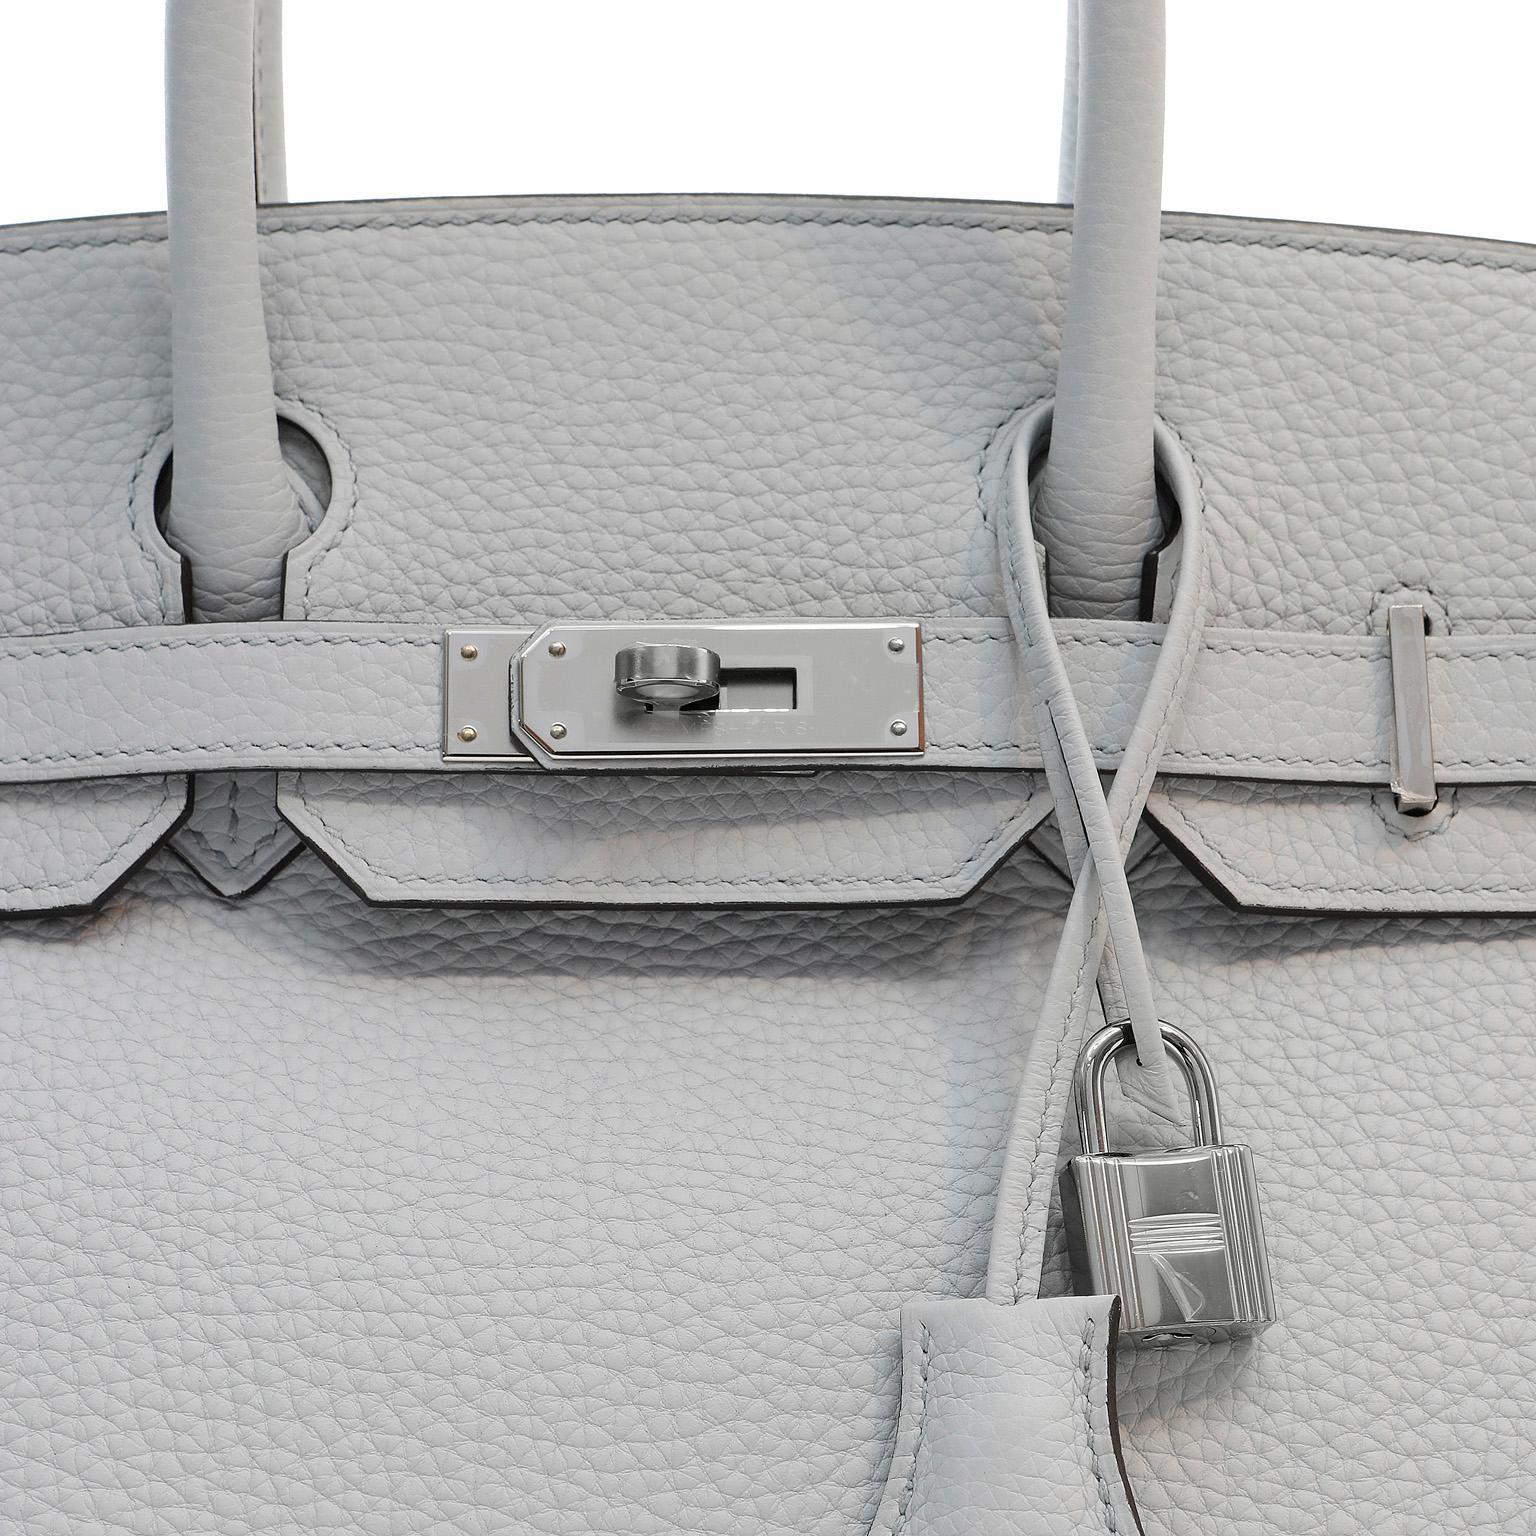 This authentic Hermès Icy Grey Togo Leather 30 cm Birkin Bag is in pristine unworn condition.  A soft neutral shade that appears pale blue or grey in different lighting, it can be enjoyed throughout all seasons. 

Togo is scratch resistant calf